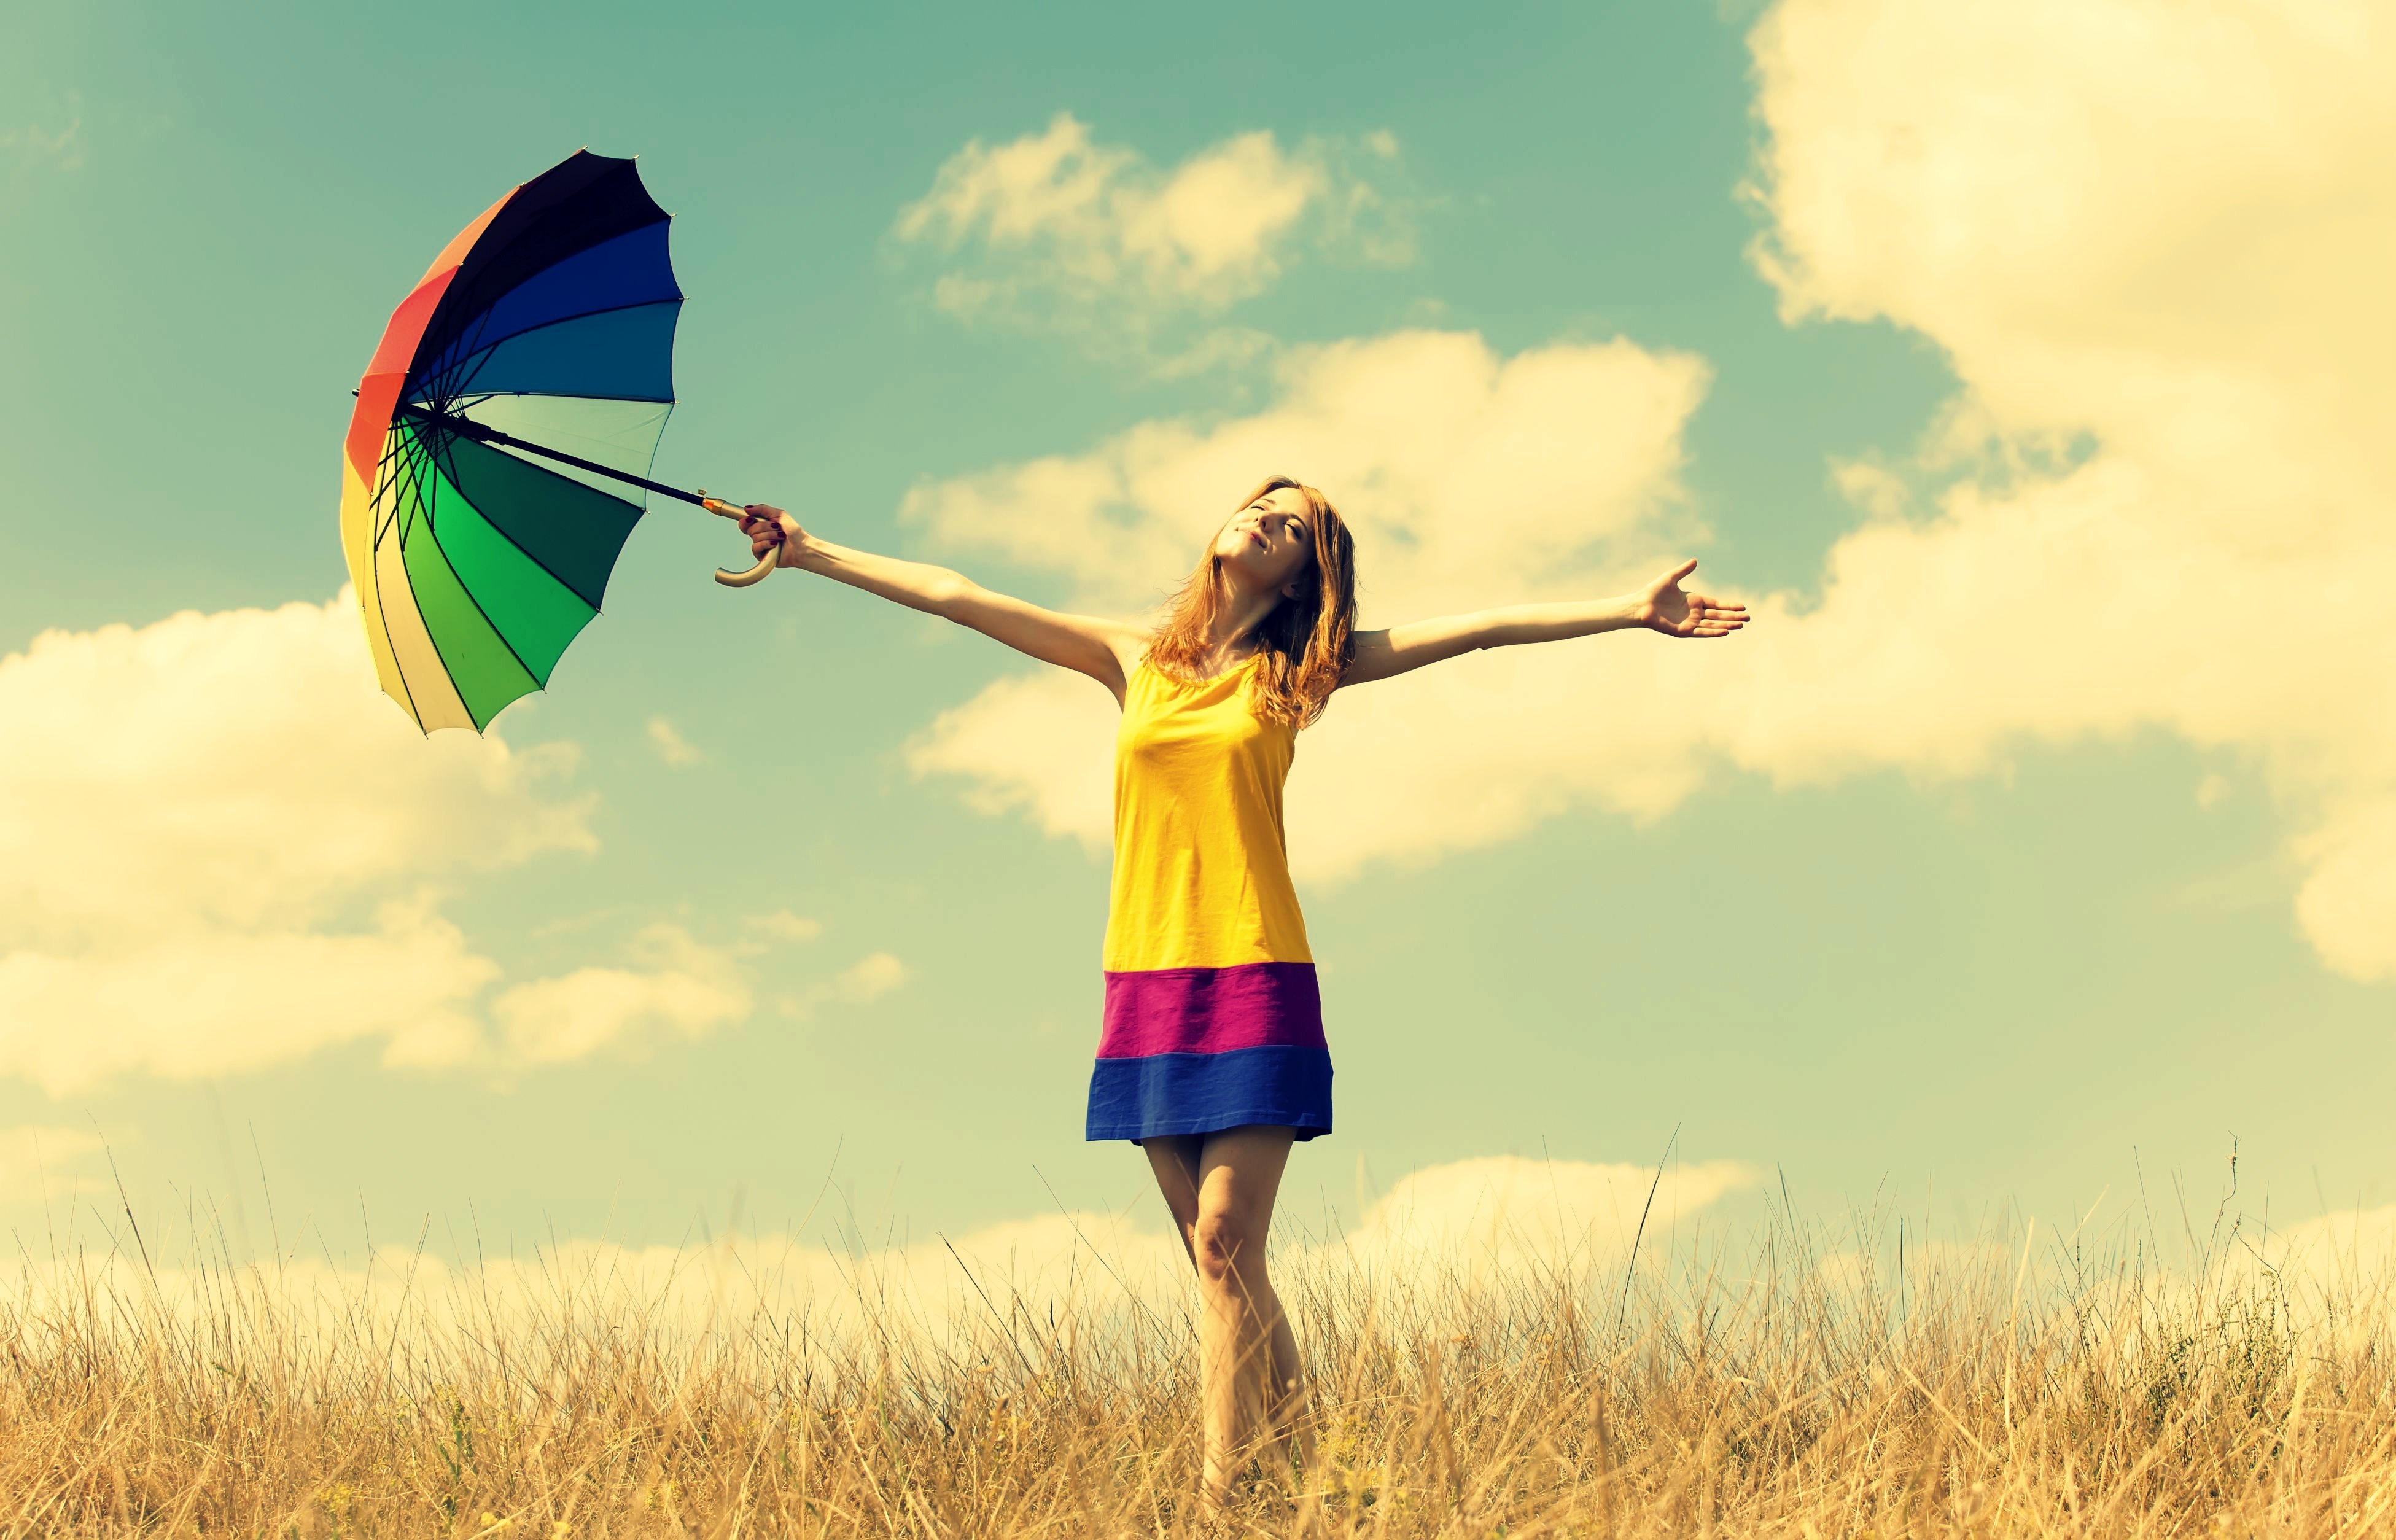 mood, Girl, Dress, Color, Hands, Smile, Summer, Umbrella, Umbrella, Happiness, Freedom, Freedom, Openness, Warmth, Plants, Nature, Field, Sun, Sky, Clouds, Background, Freedom Wallpaper